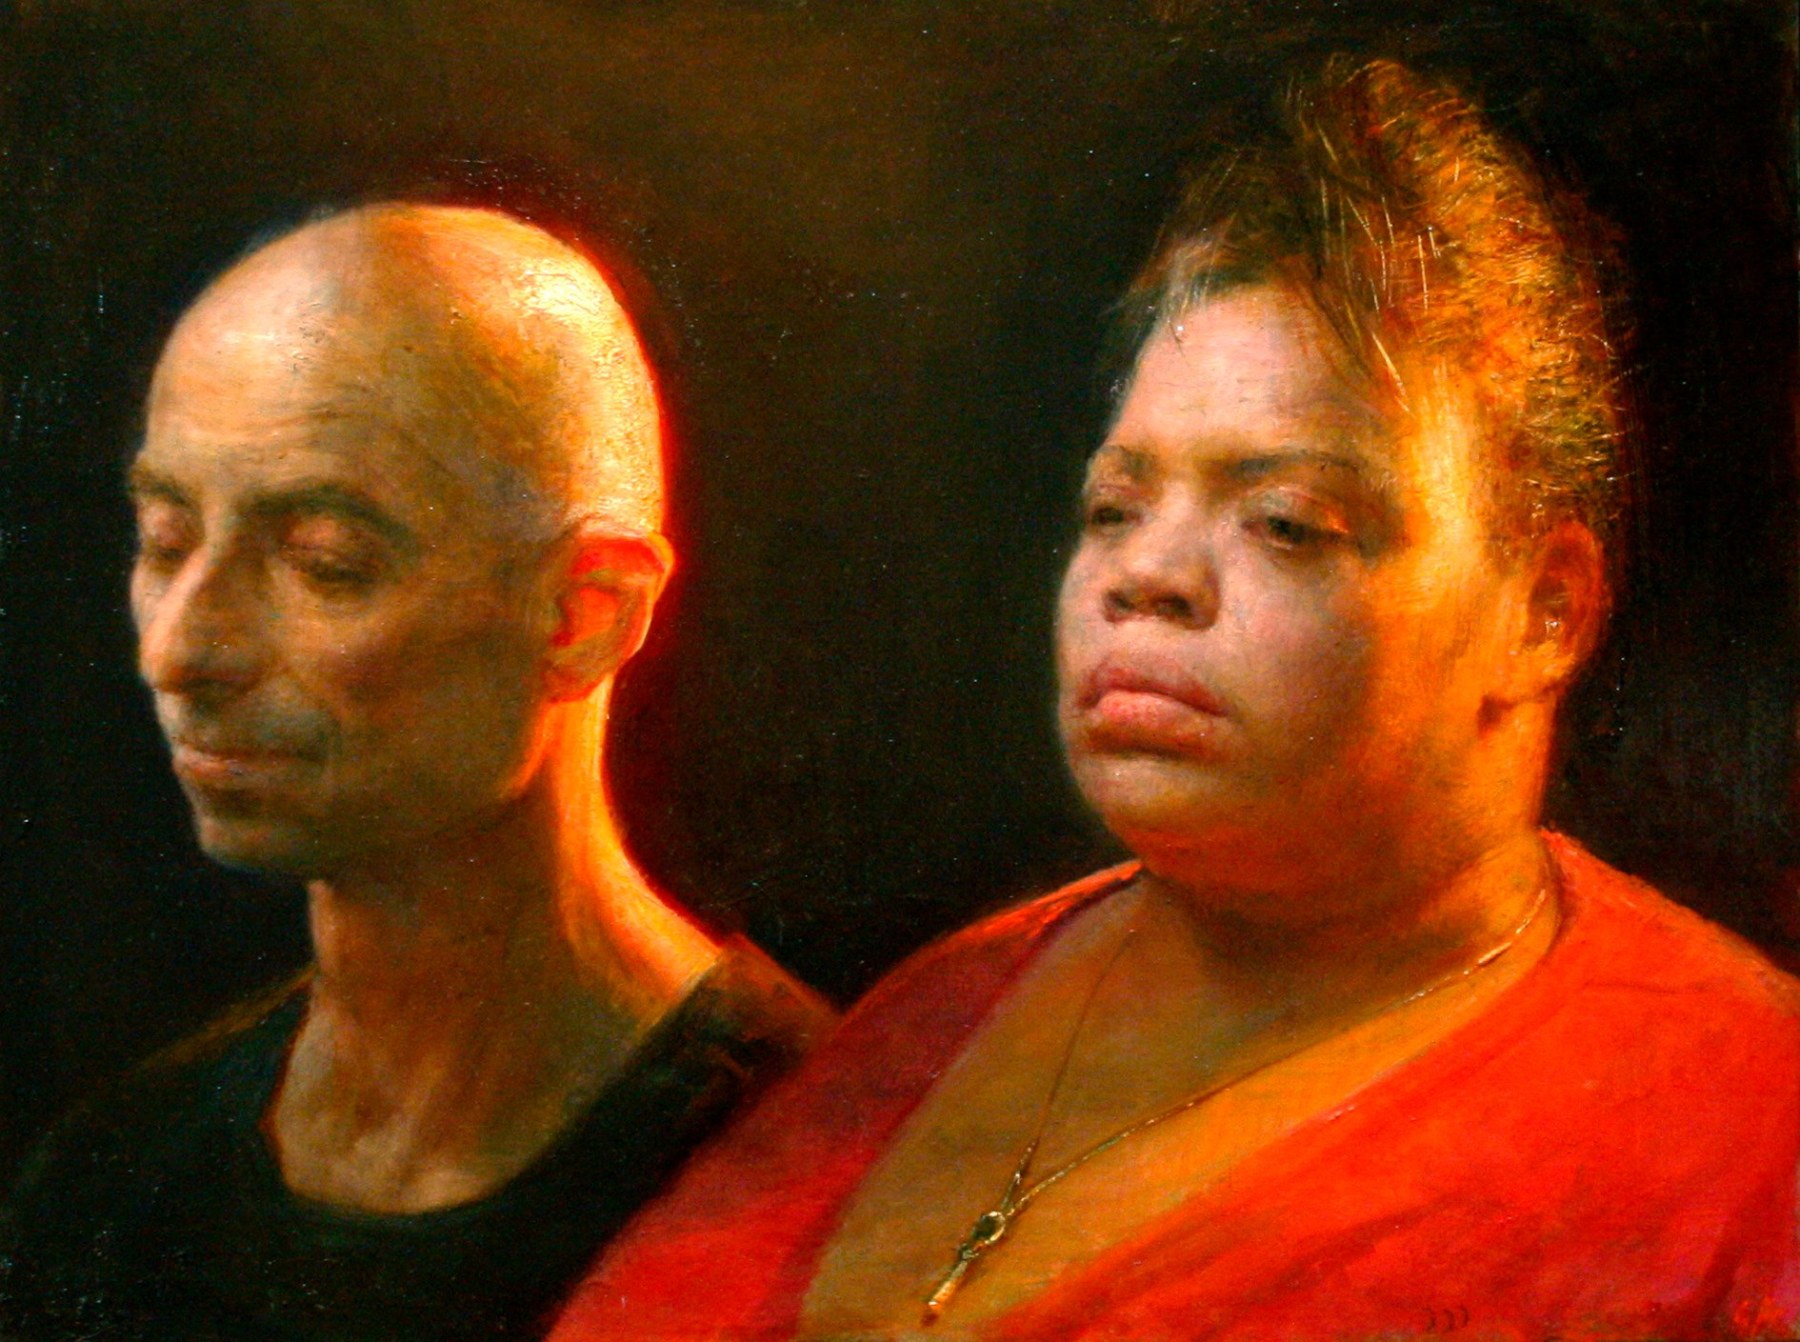 Steven Assael, Kim and Yves, 2008, oil on panel, 18 x 24 inches